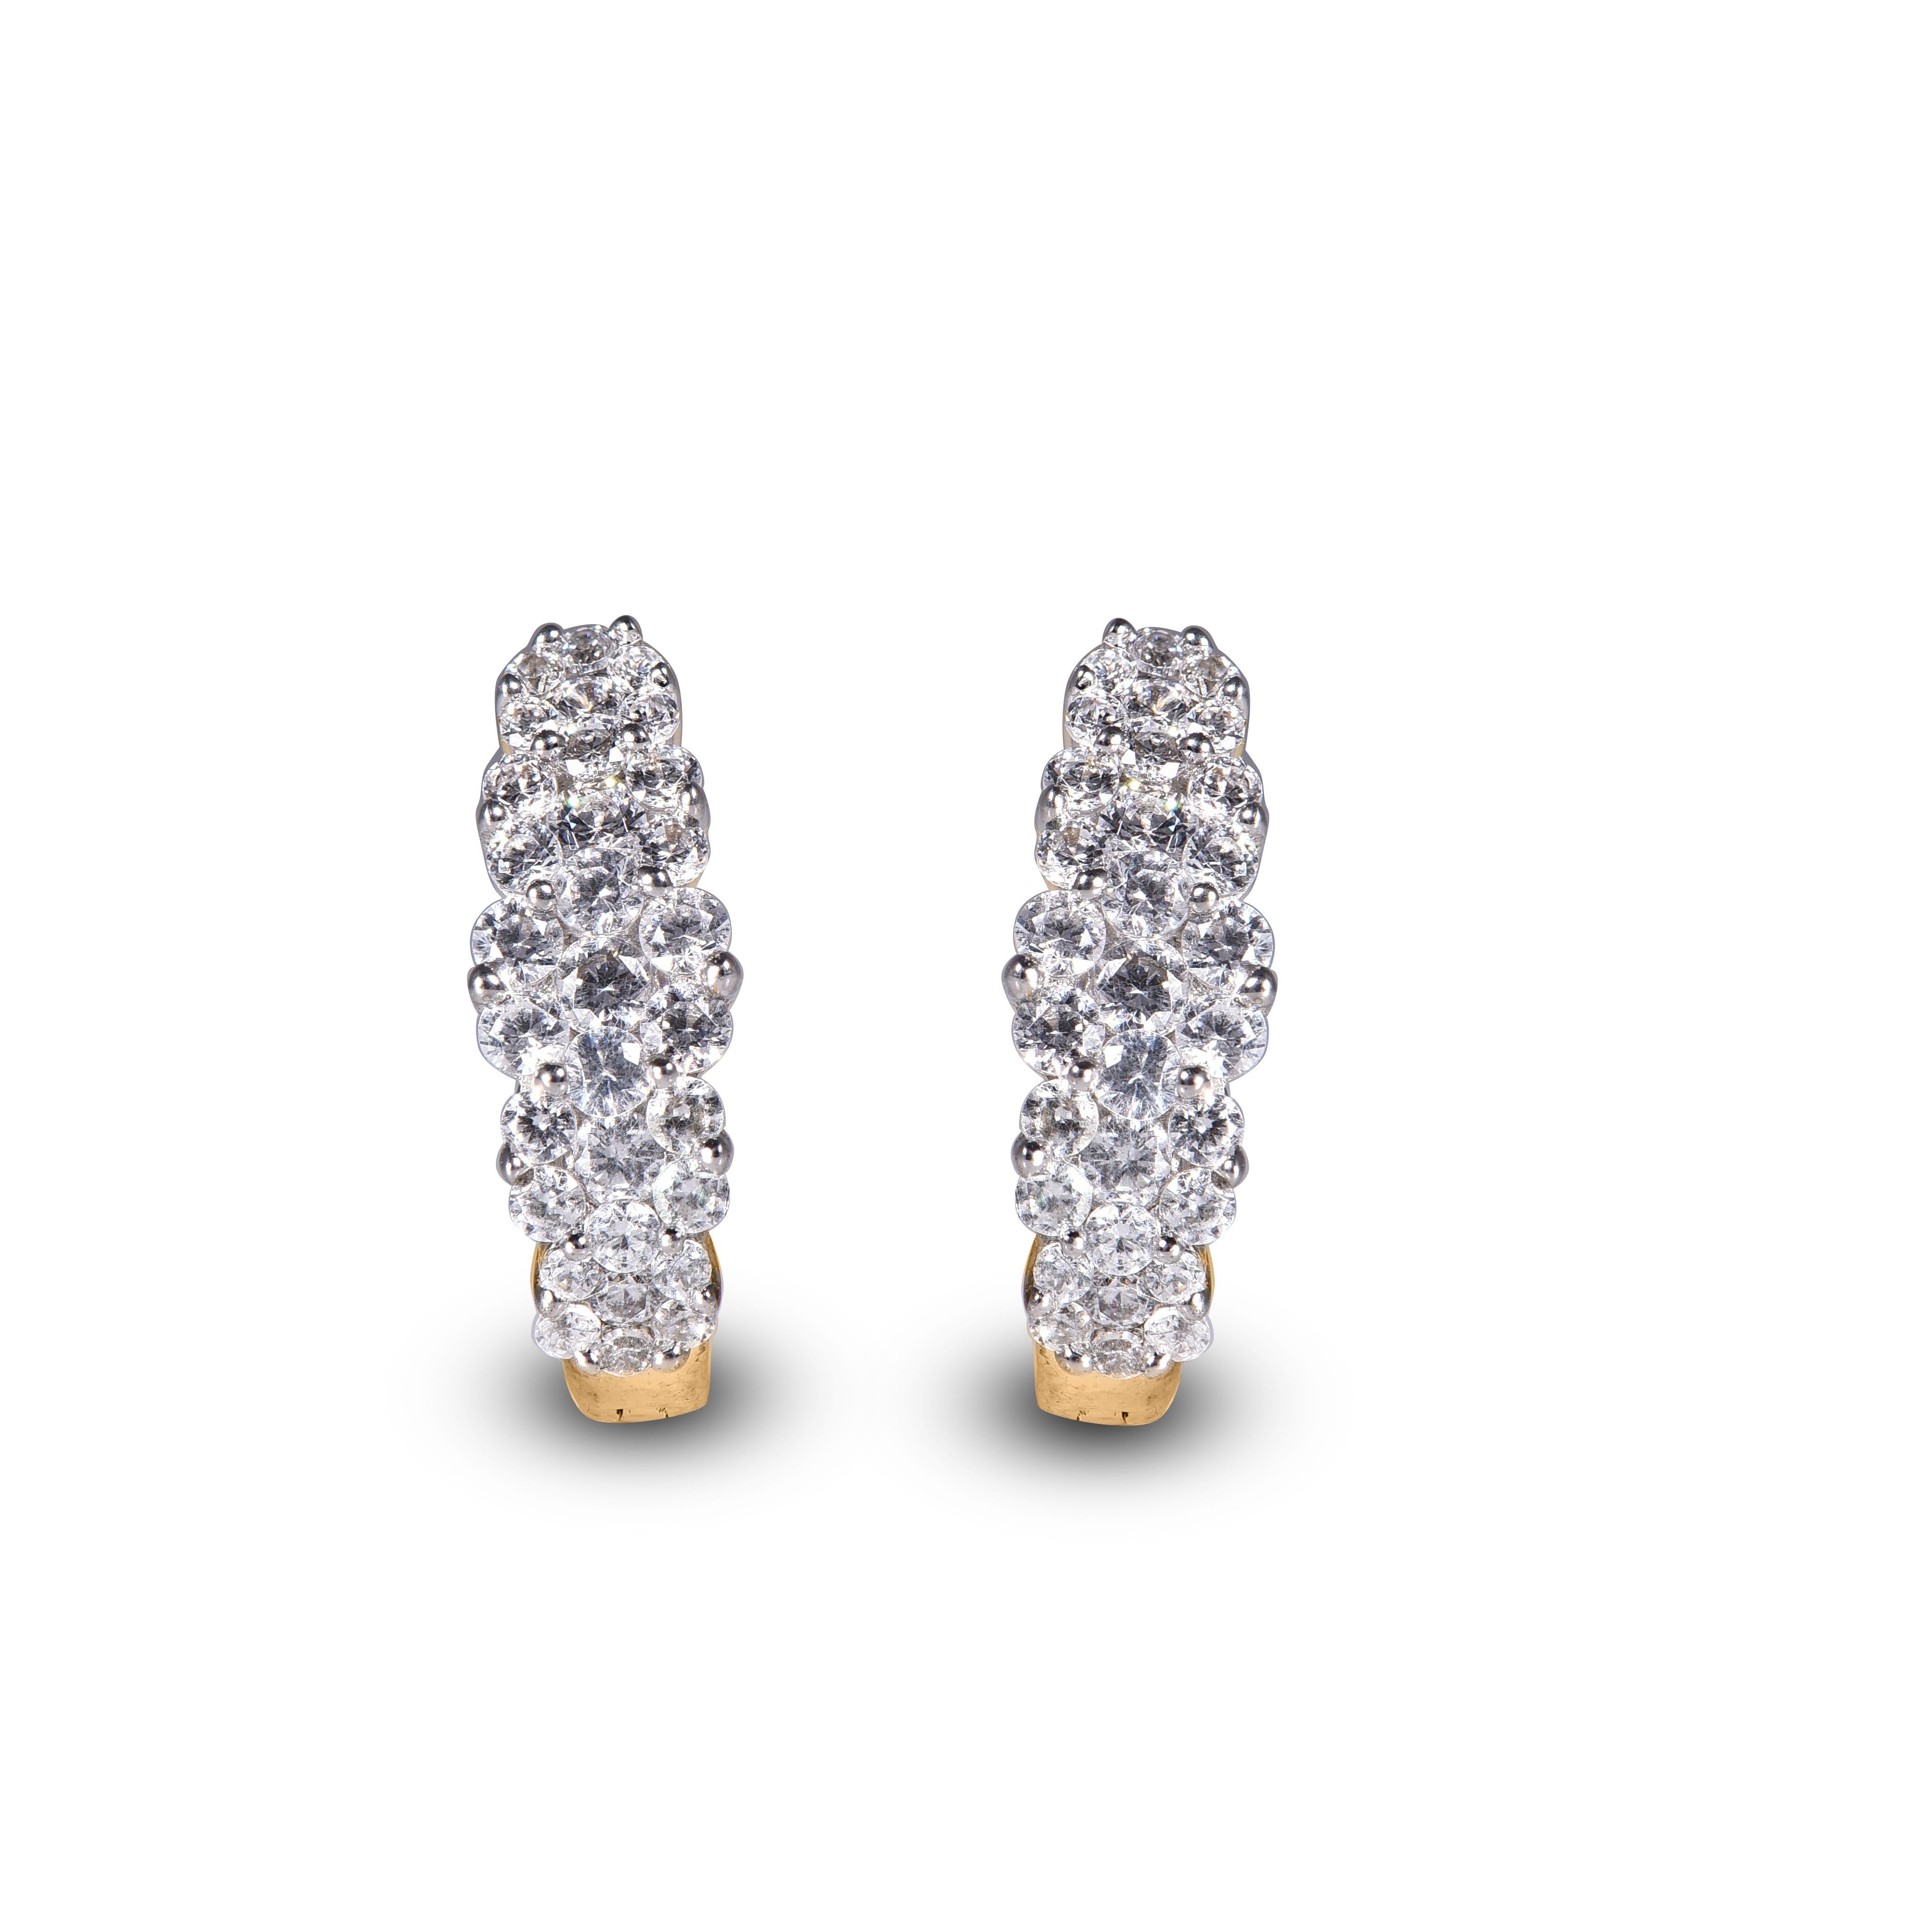 Adorn your formal wear with extra glitz when you put on these hoop huggie earrings. Expertly crafted in 18K White Gold,  earring is cleverly filled with 62 round diamond set in pressure setting and dazzles in H-I color I1 clarity. Captivating with